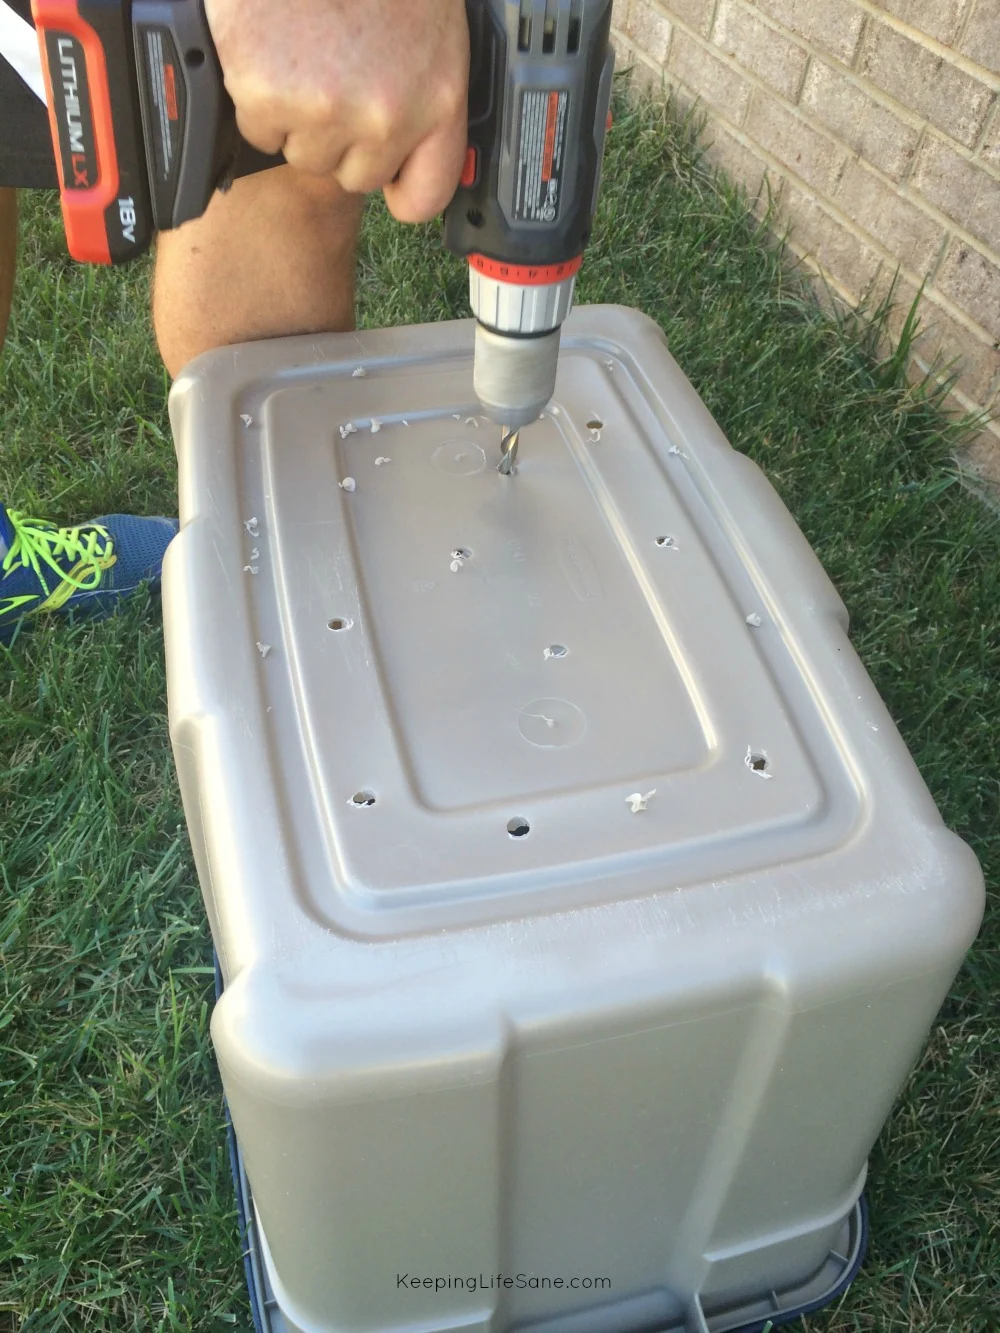 Plastic Rubbermaid bin that's upside down in grass with a man's hand drilling holes in the bottom.